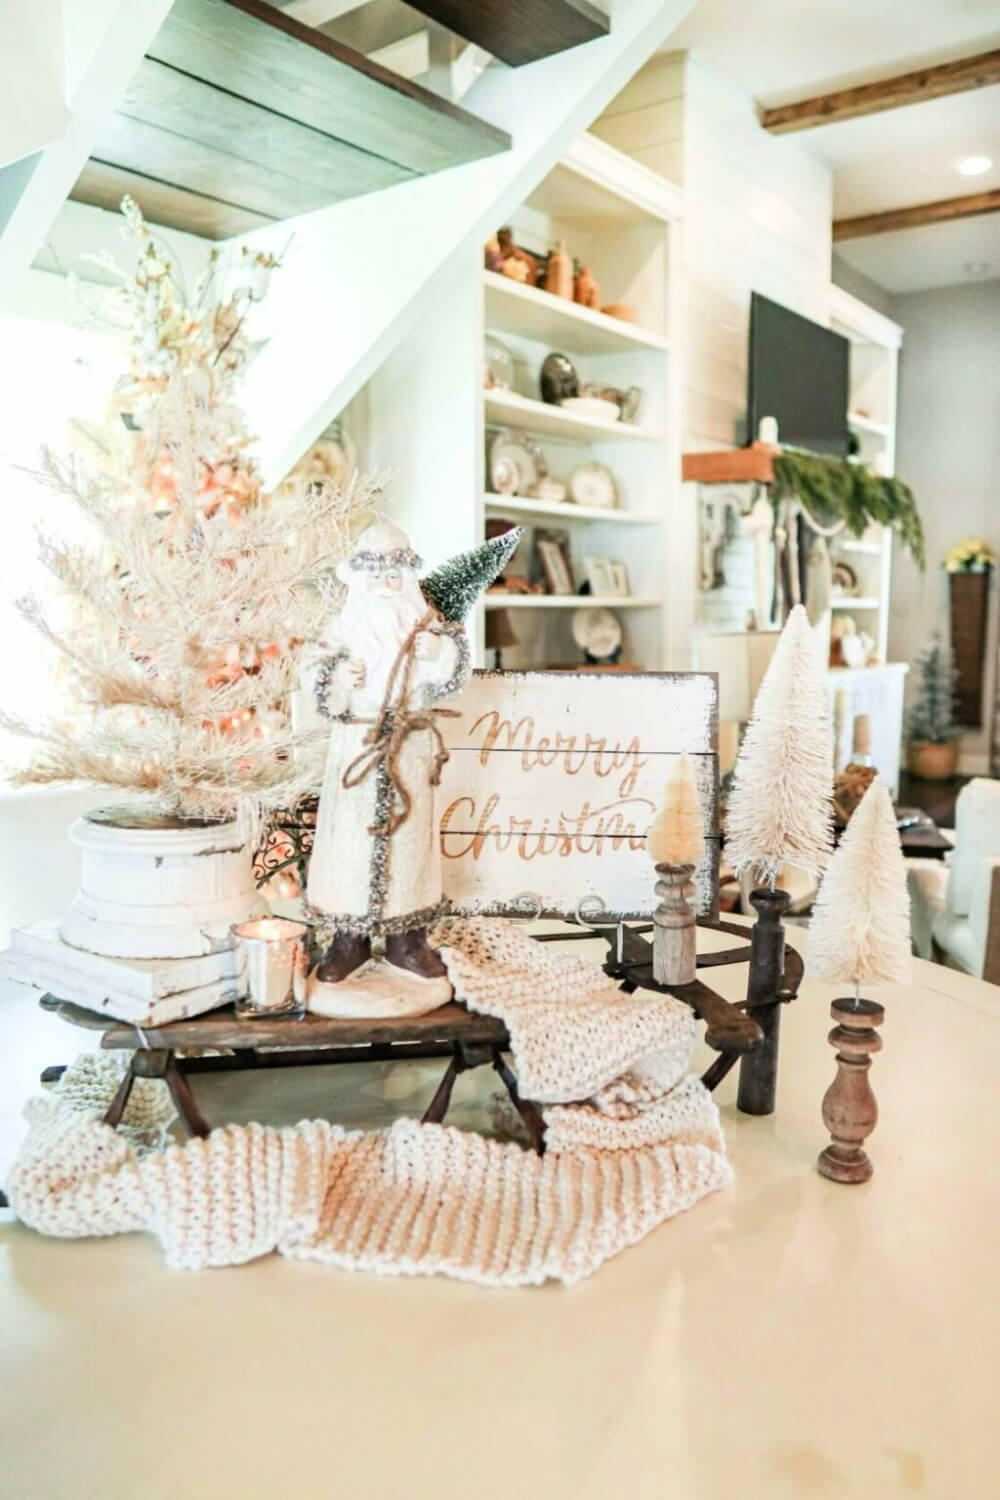 In 10 Christmas Vignettes On Display, a neutral Christmas vignette arranged on a vintage sled.